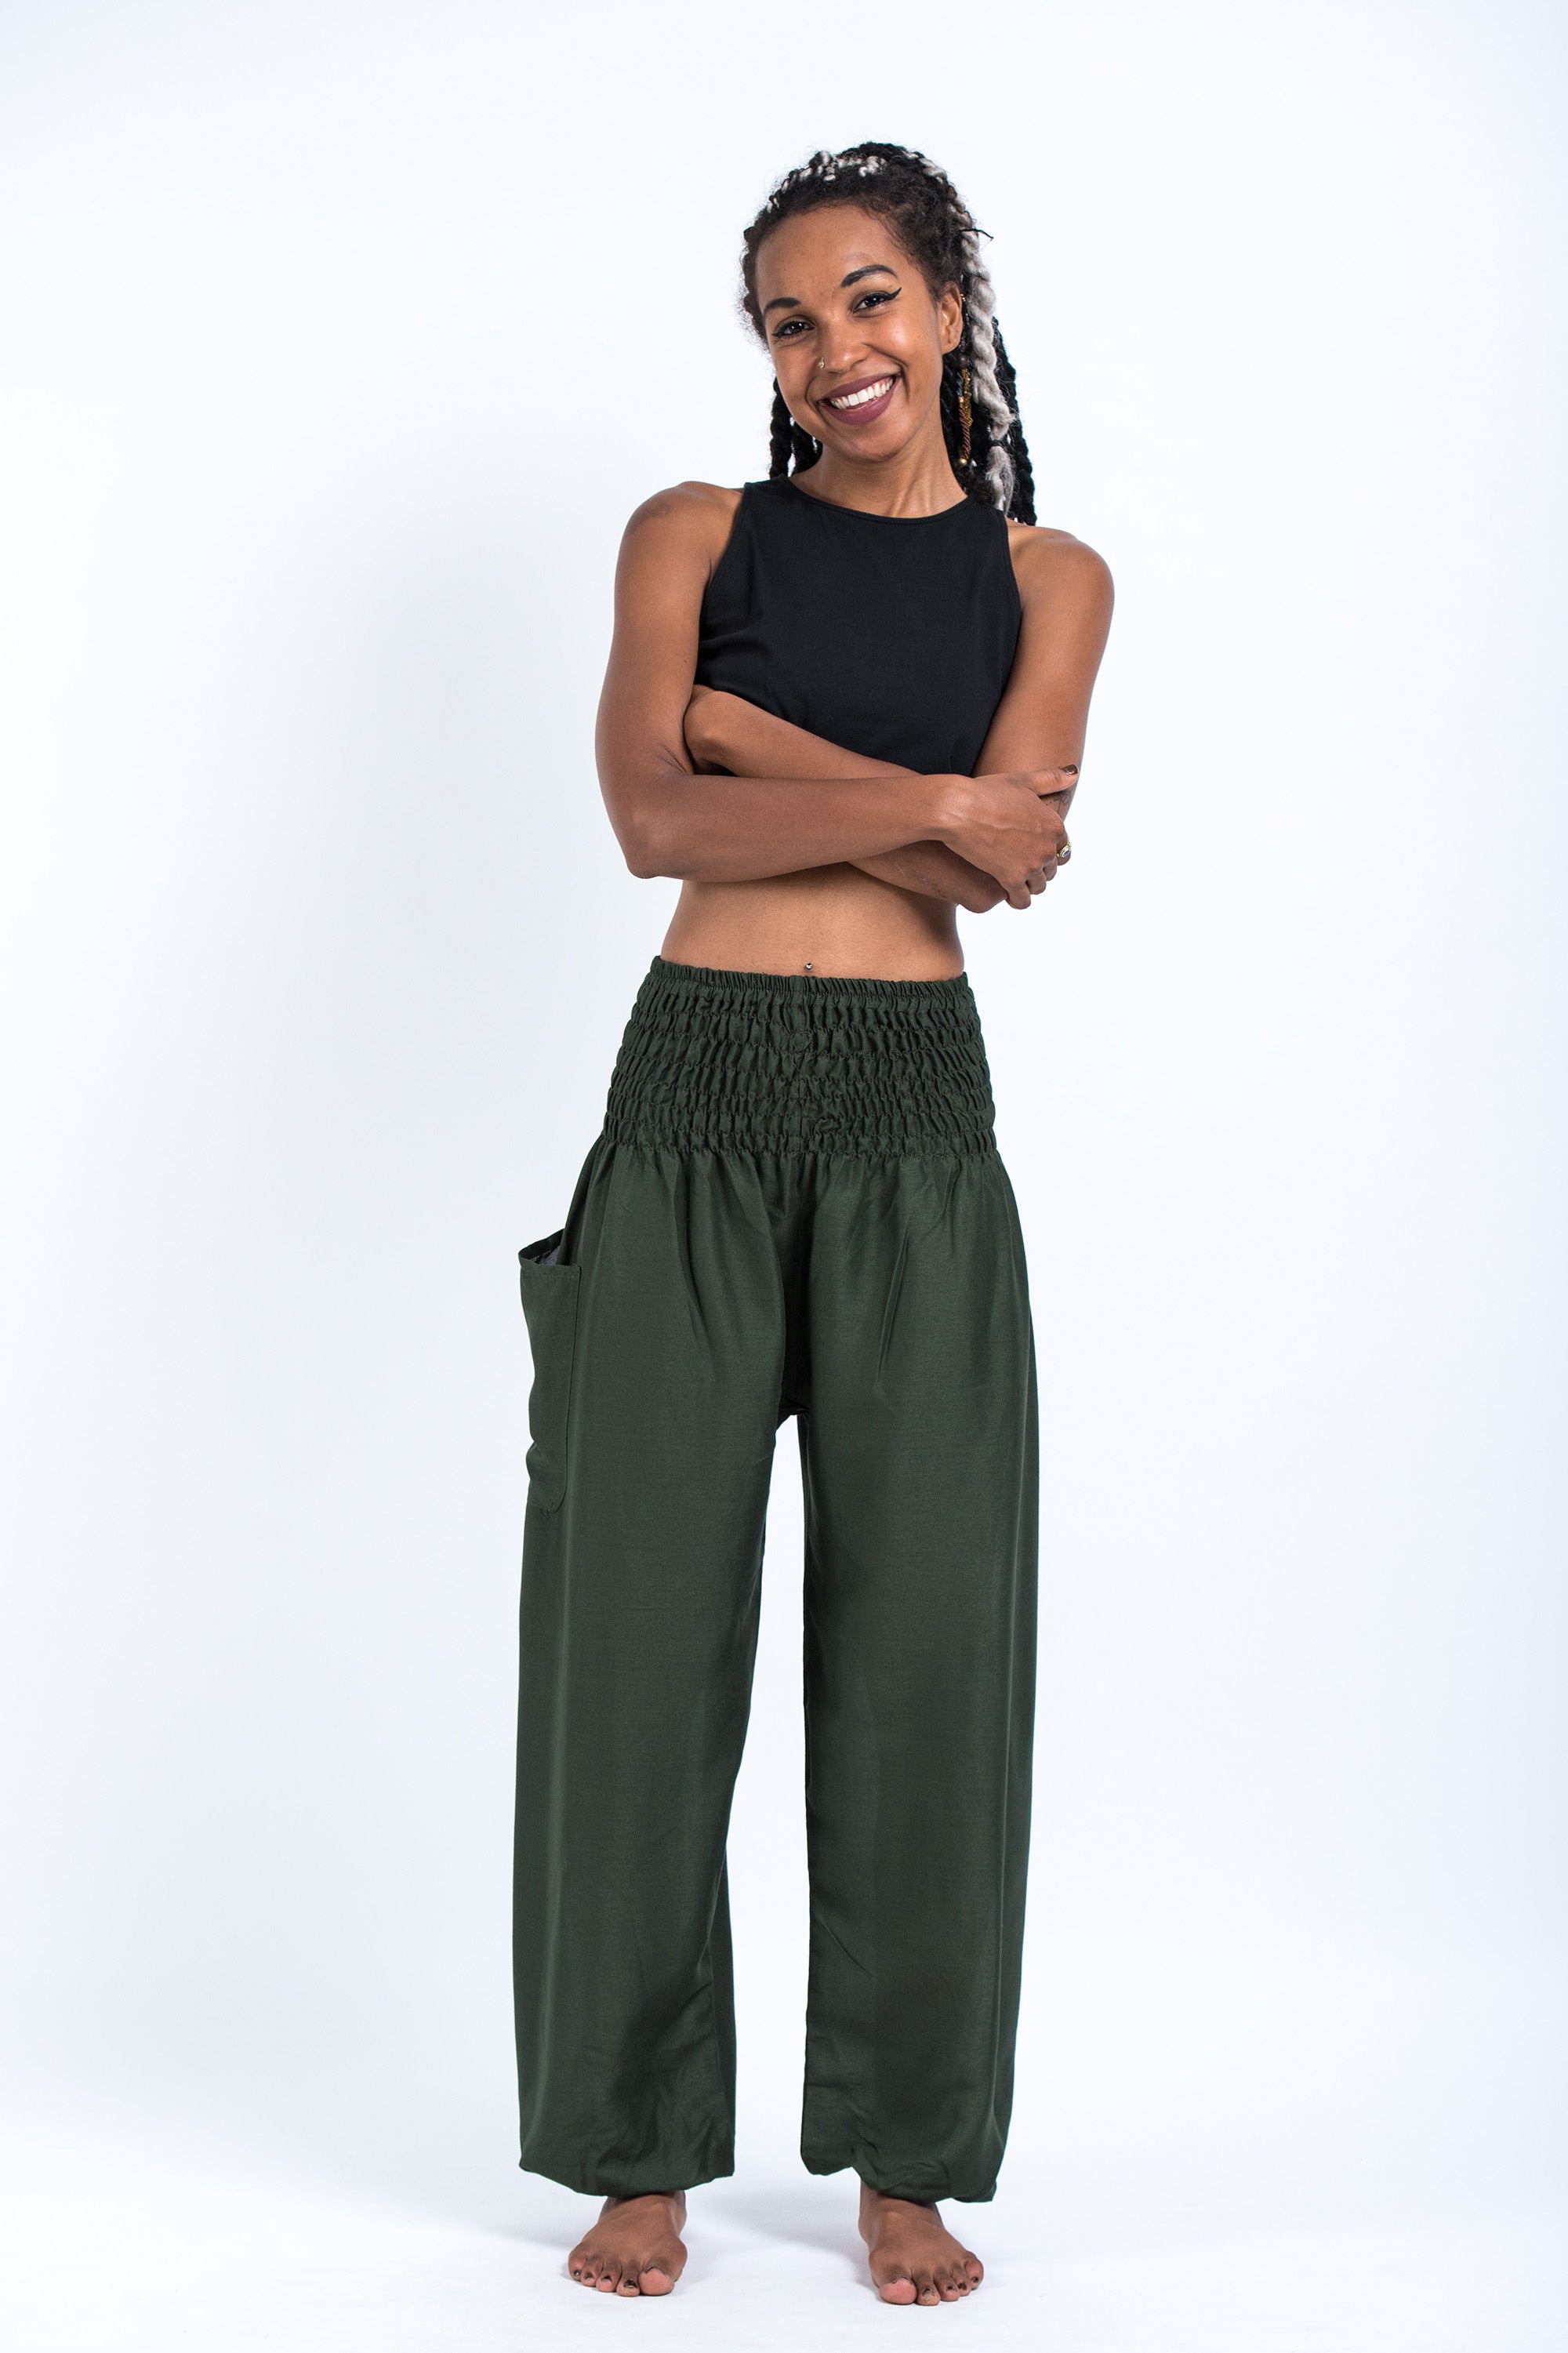 Women's Thai Harem Palazzo Pants in Solid Green